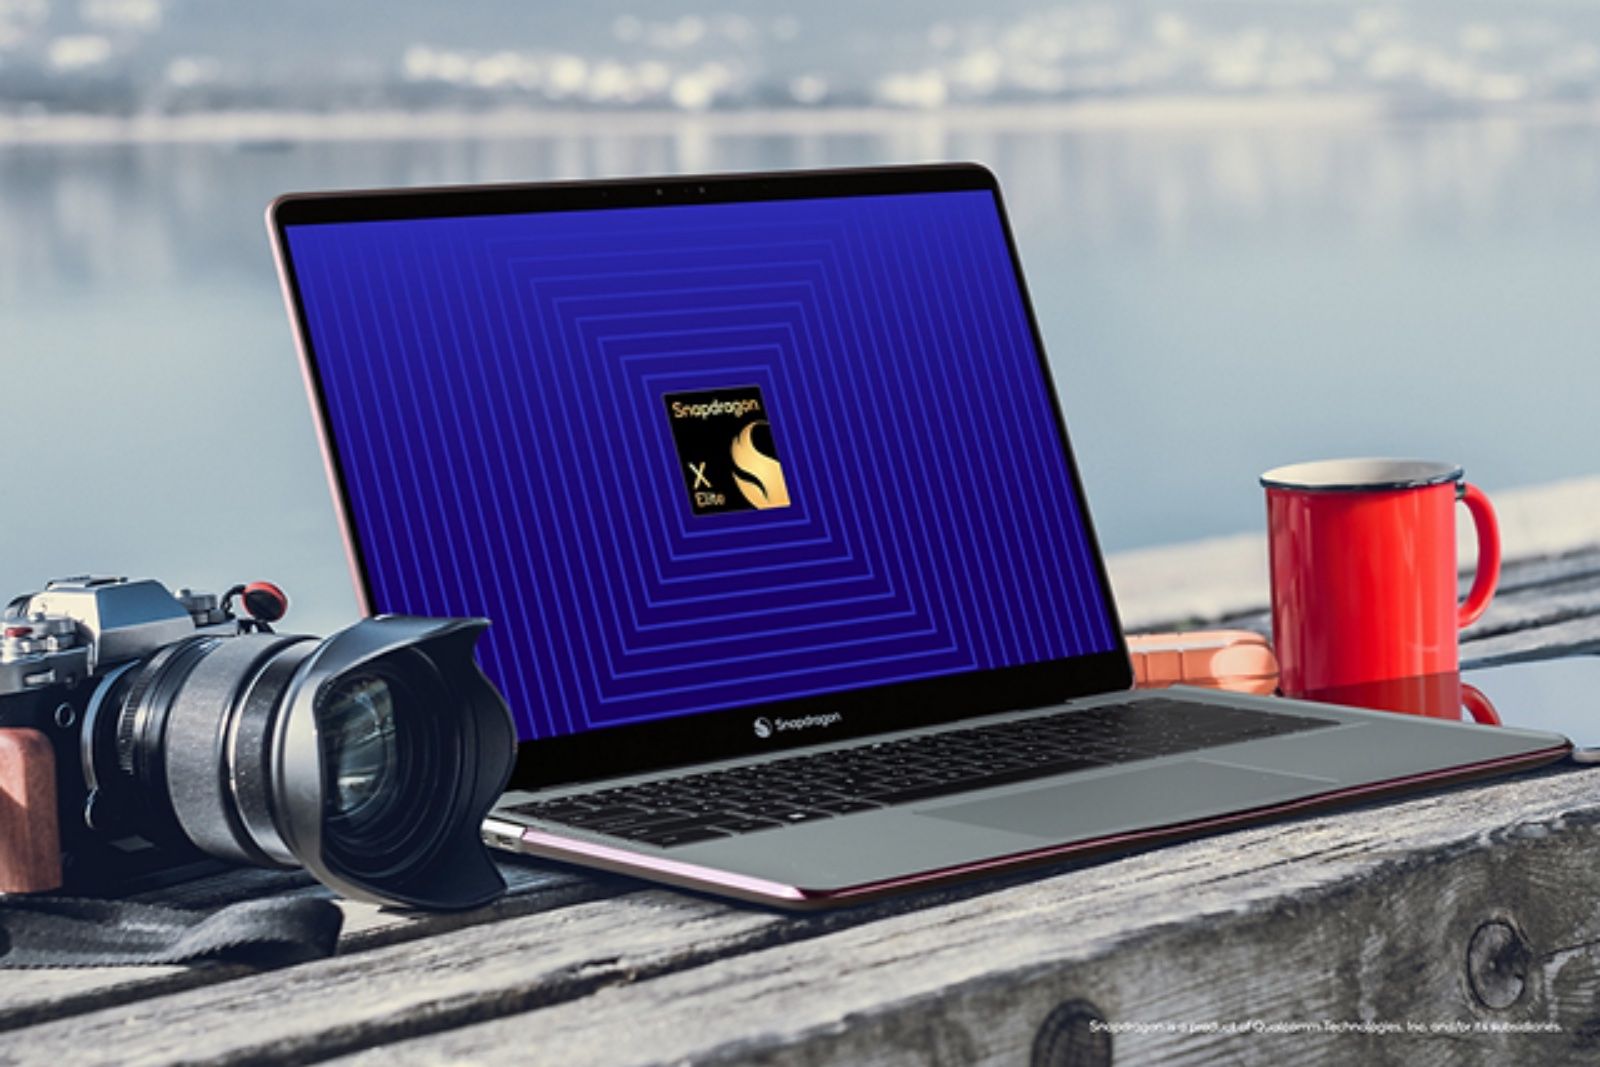 Snapdragon X Elite will power next-gen Surface devices to better compete with Apple